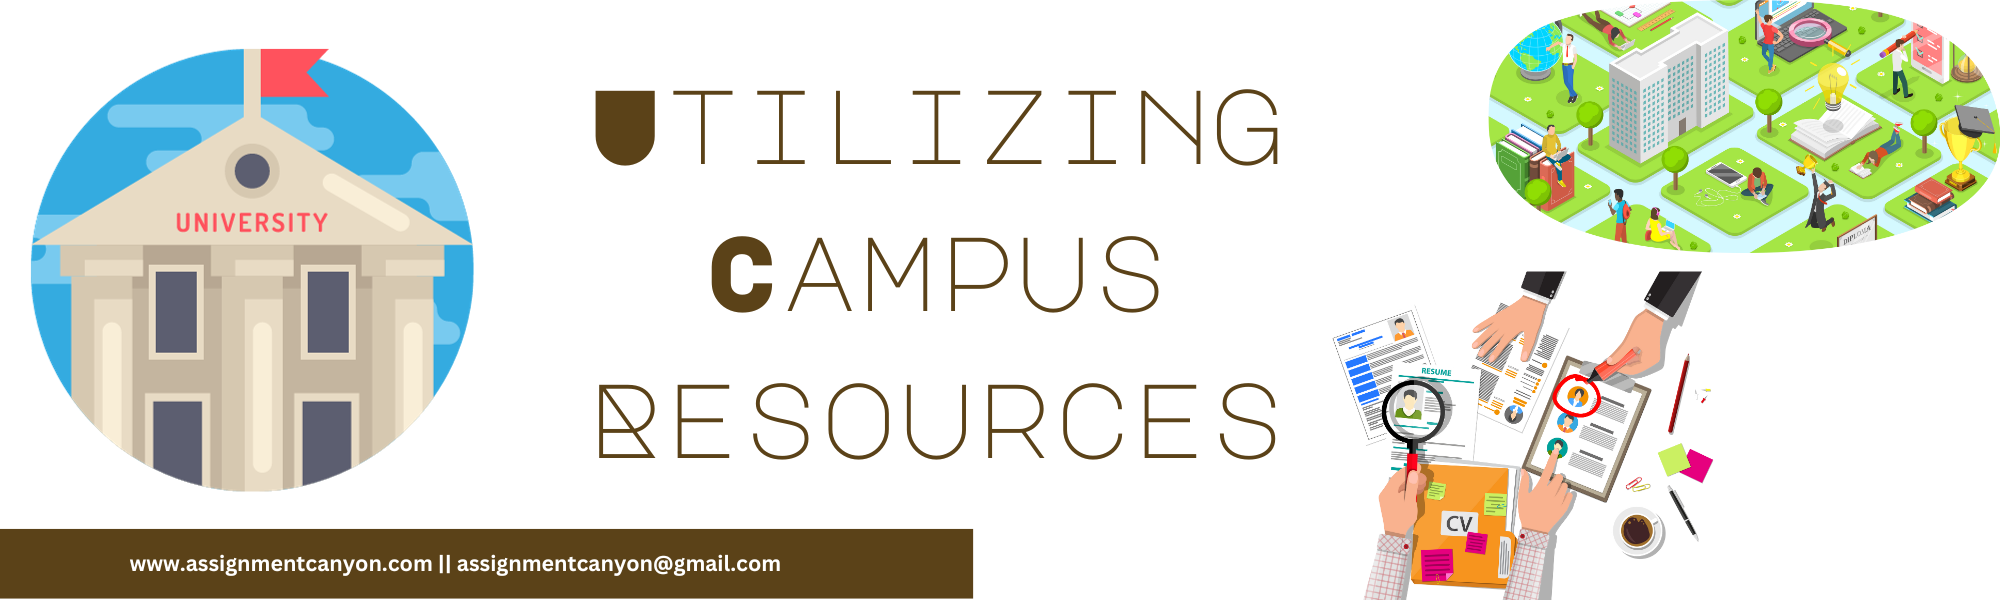 Utilizing Campus Resources for assignment answers for college students 